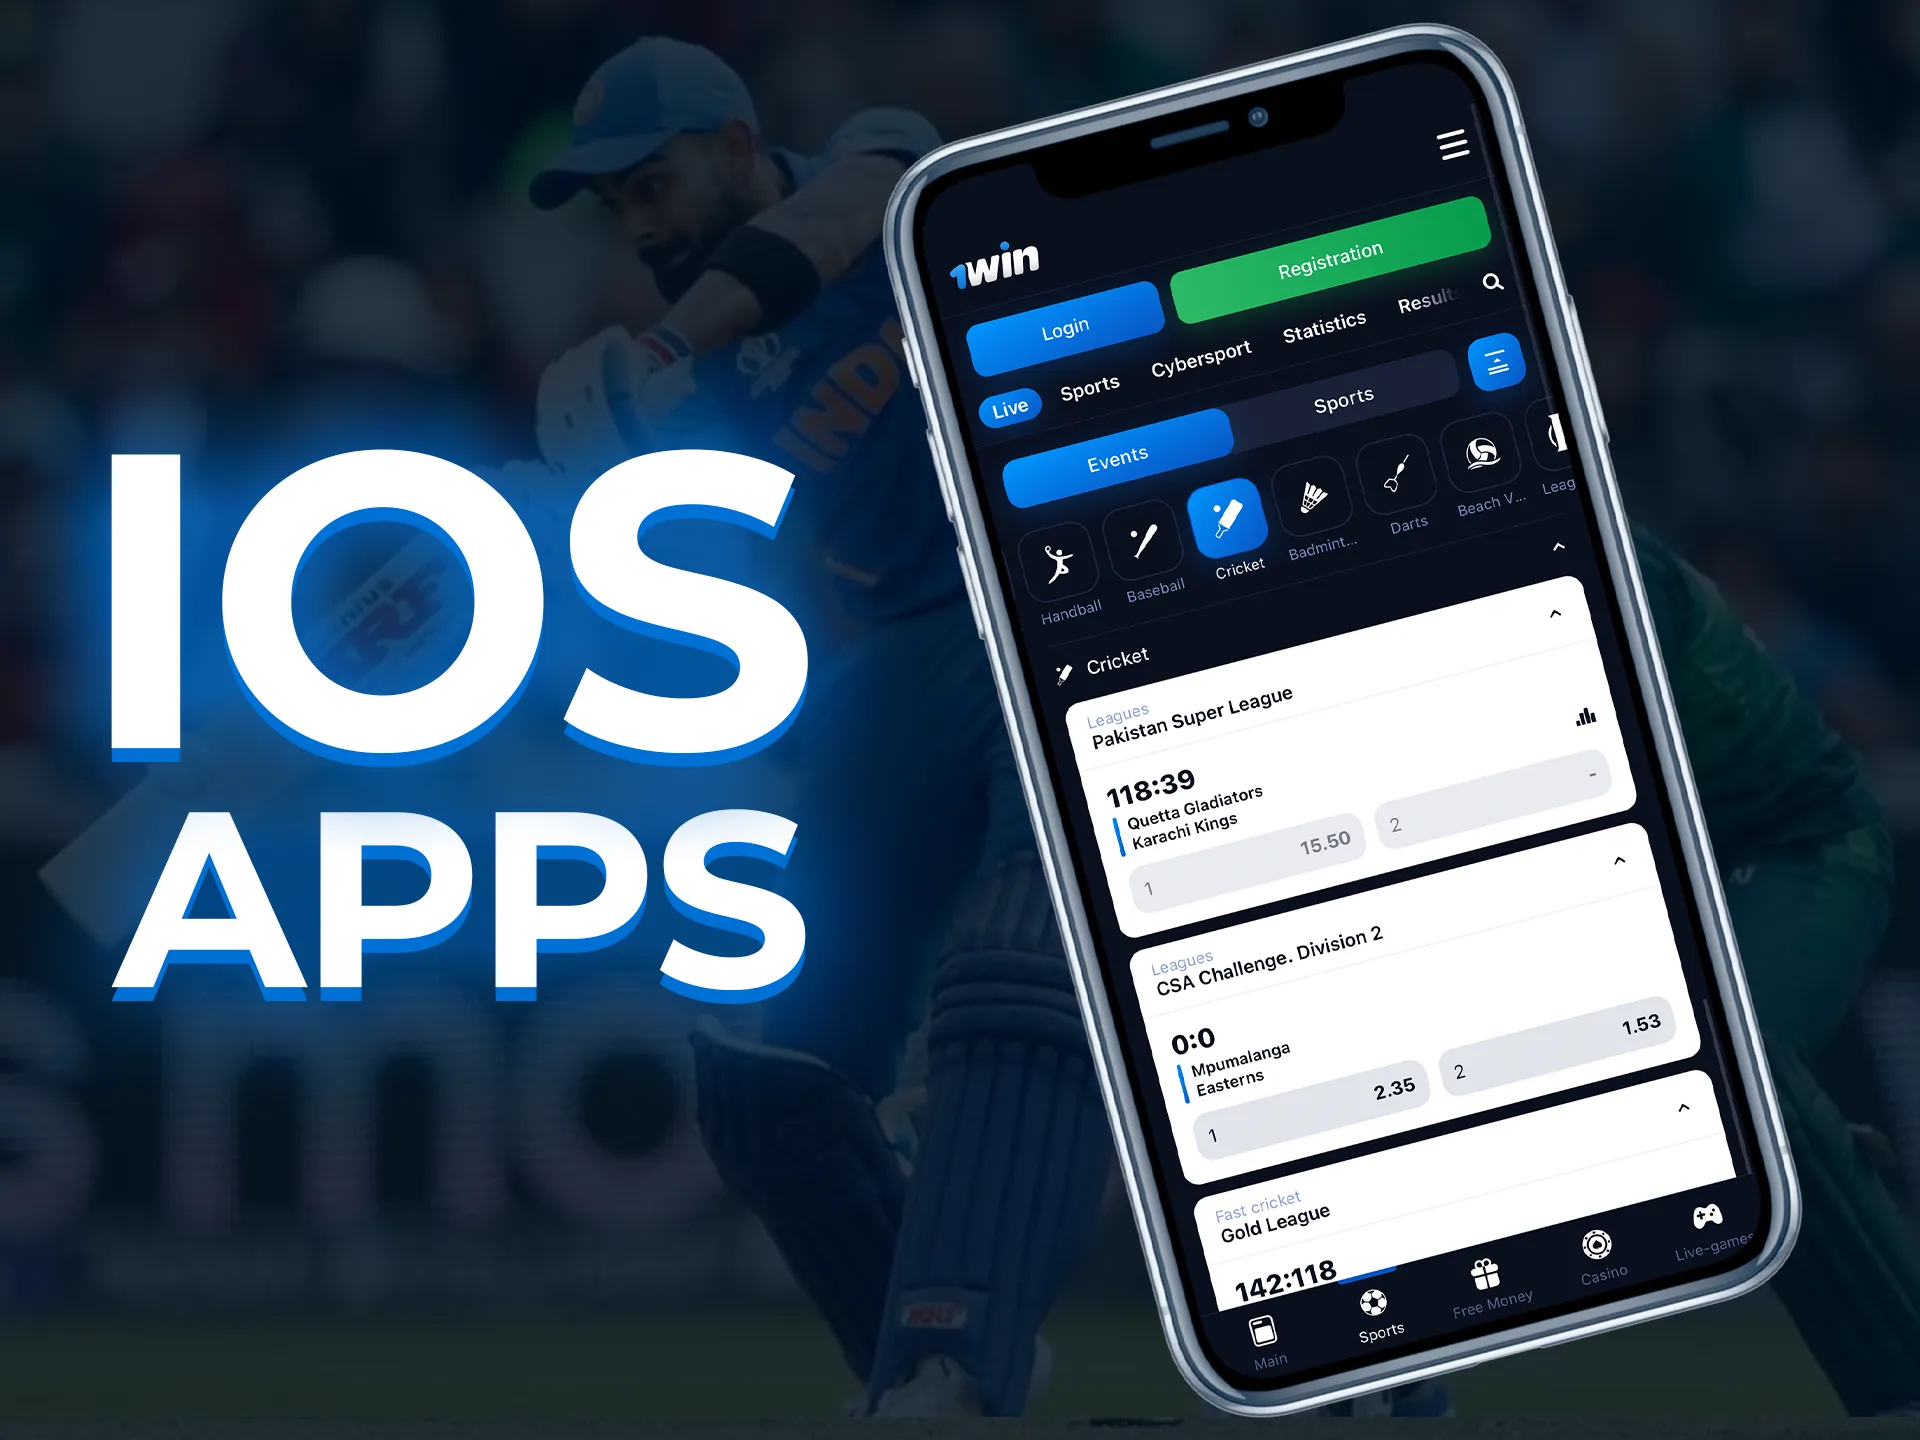 A review on the best cricket betting apps for iOS devices in India.